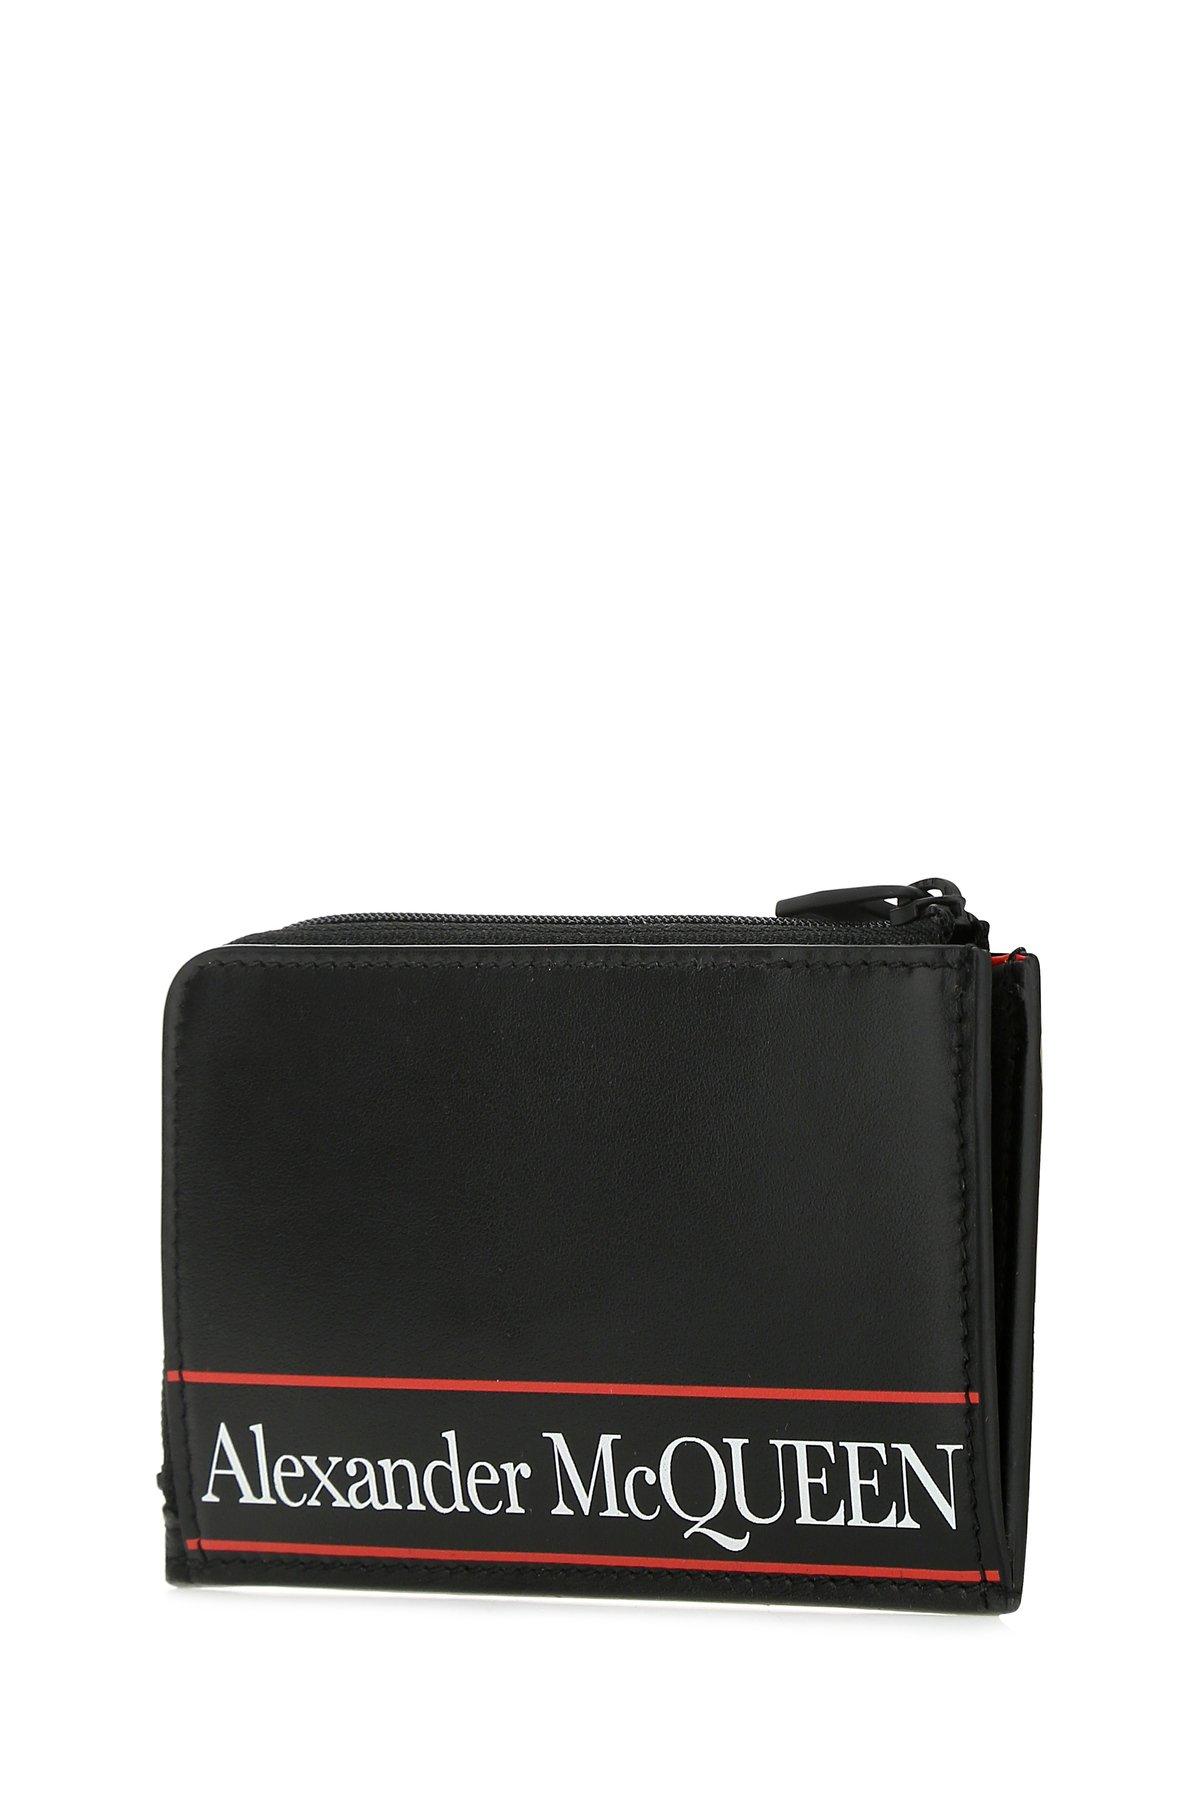 Alexander McQueen Leather Logo Pouch in Black,Red,White (Black) for Men ...